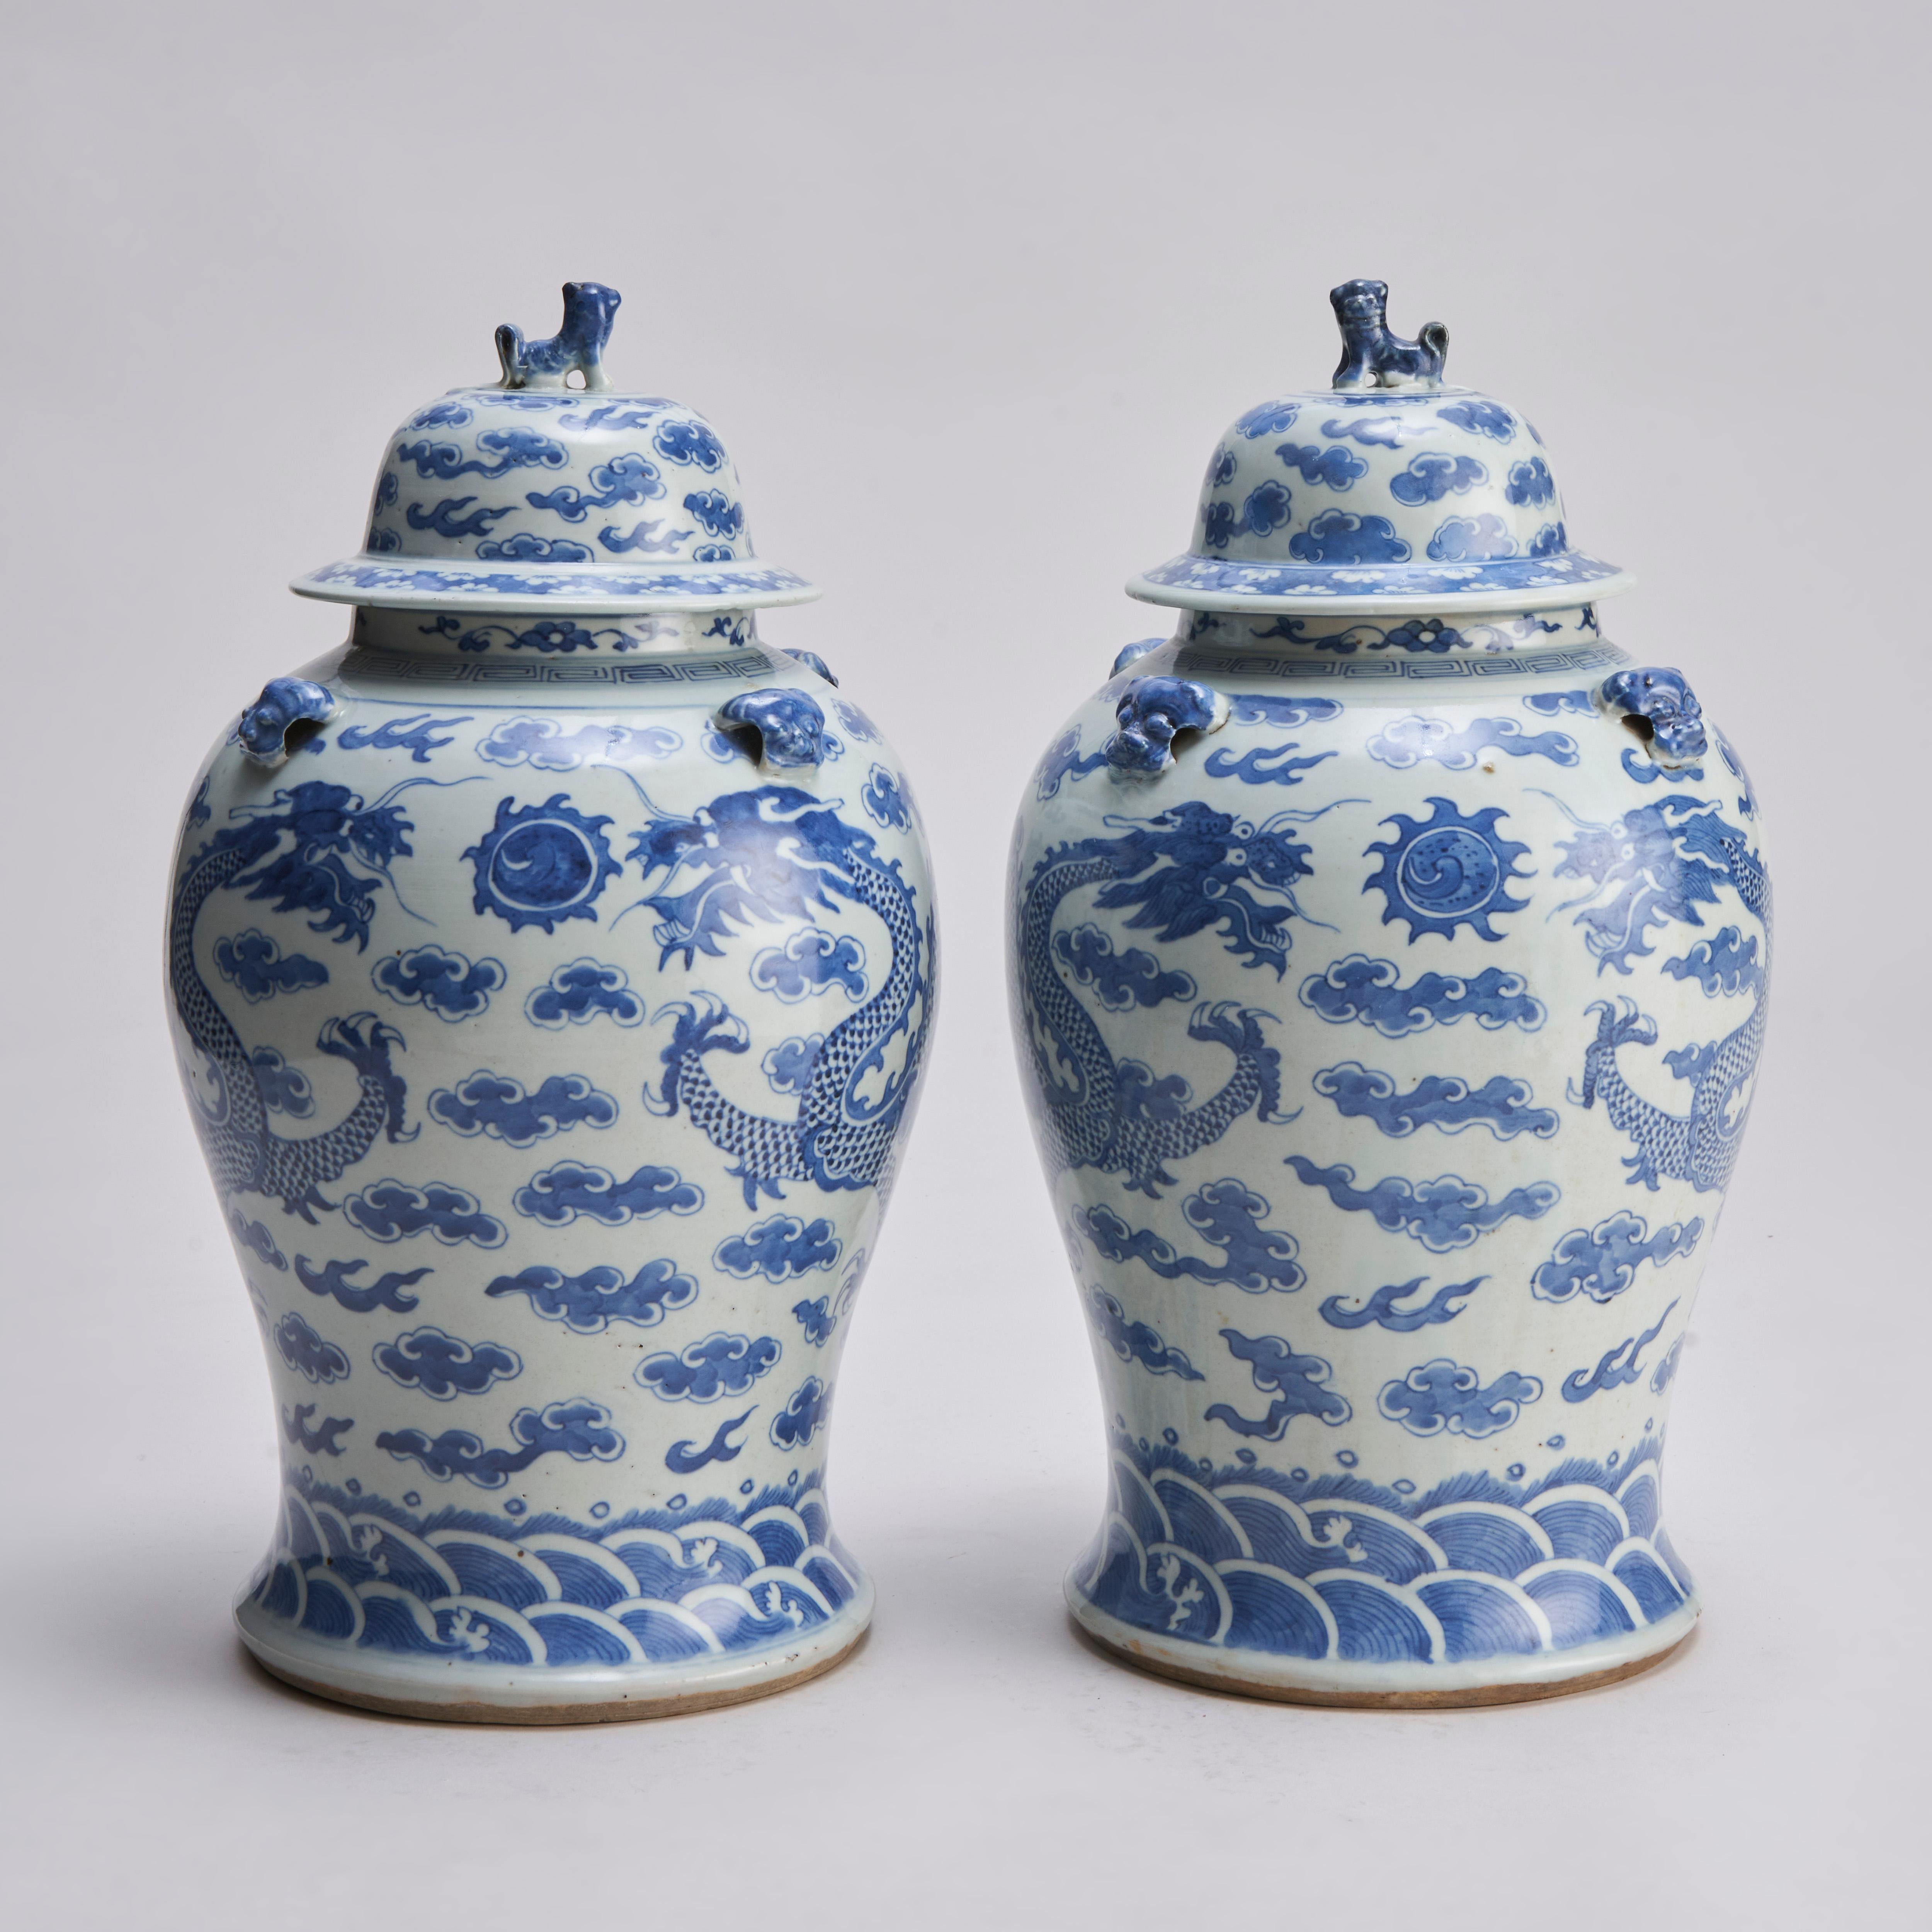 A pair of 19th century Chinese blue and white jars and covers with Shi Shi dog knops and moulded Shi Shi dog decoration to the shoulders.

The vases decorated with matching designs of dragons chasing the flaming pearl, against a a ground of clouds